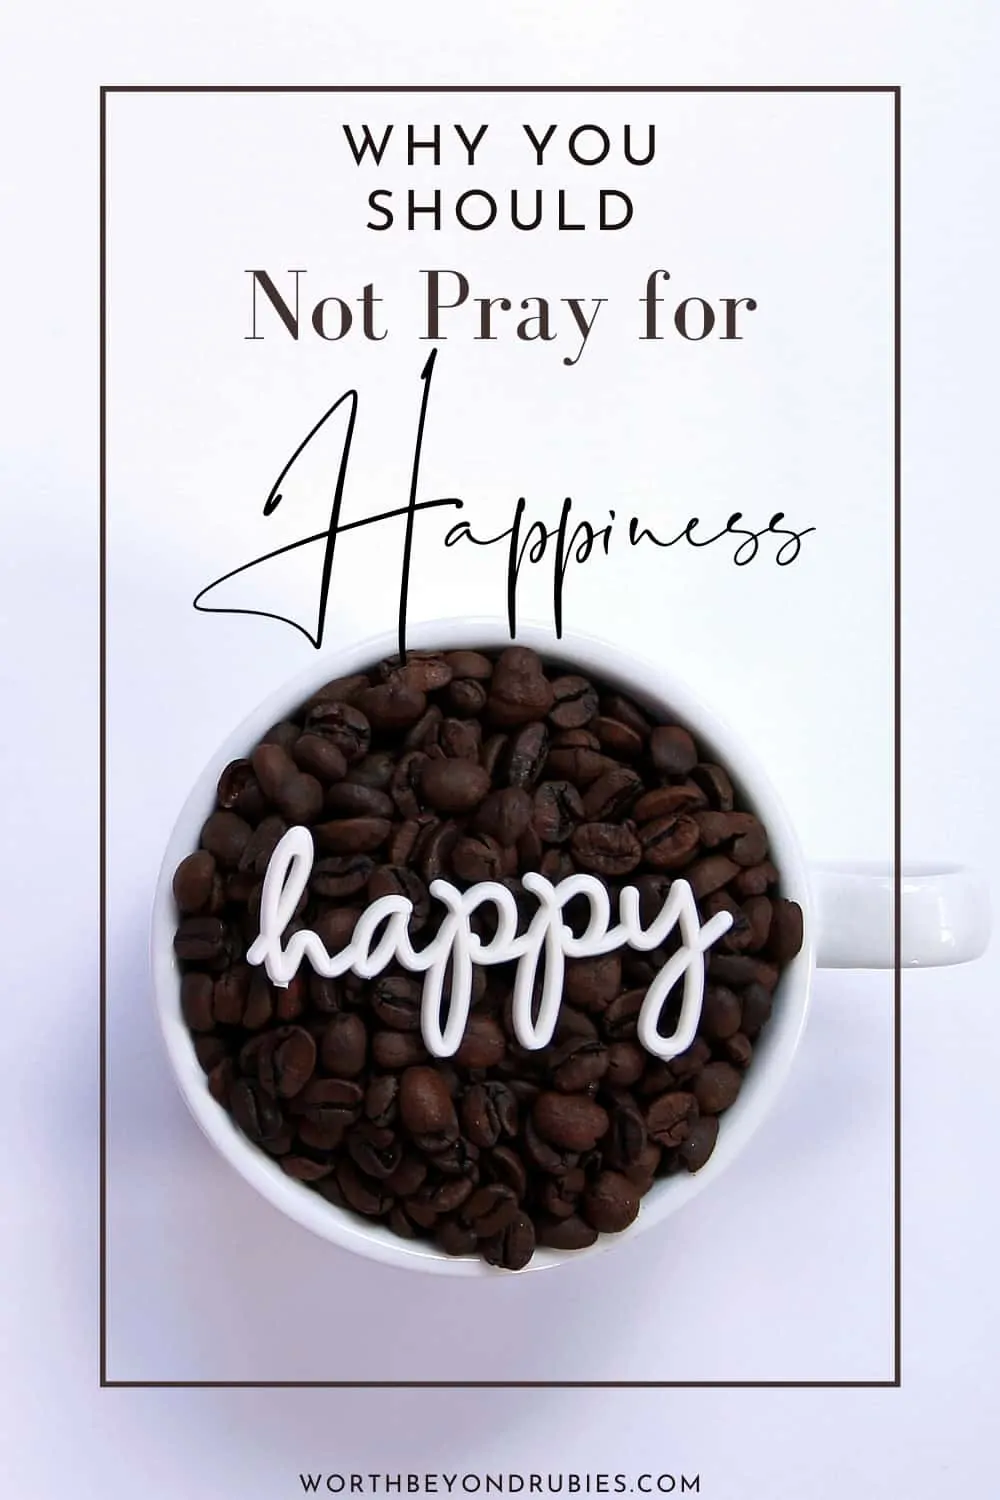 An image of a mug filled with coffee beans and the word happy written in script on top of it with a text overlay that says Why You Should Not Pray for Happiness and a link to worthbeyondrubies.com